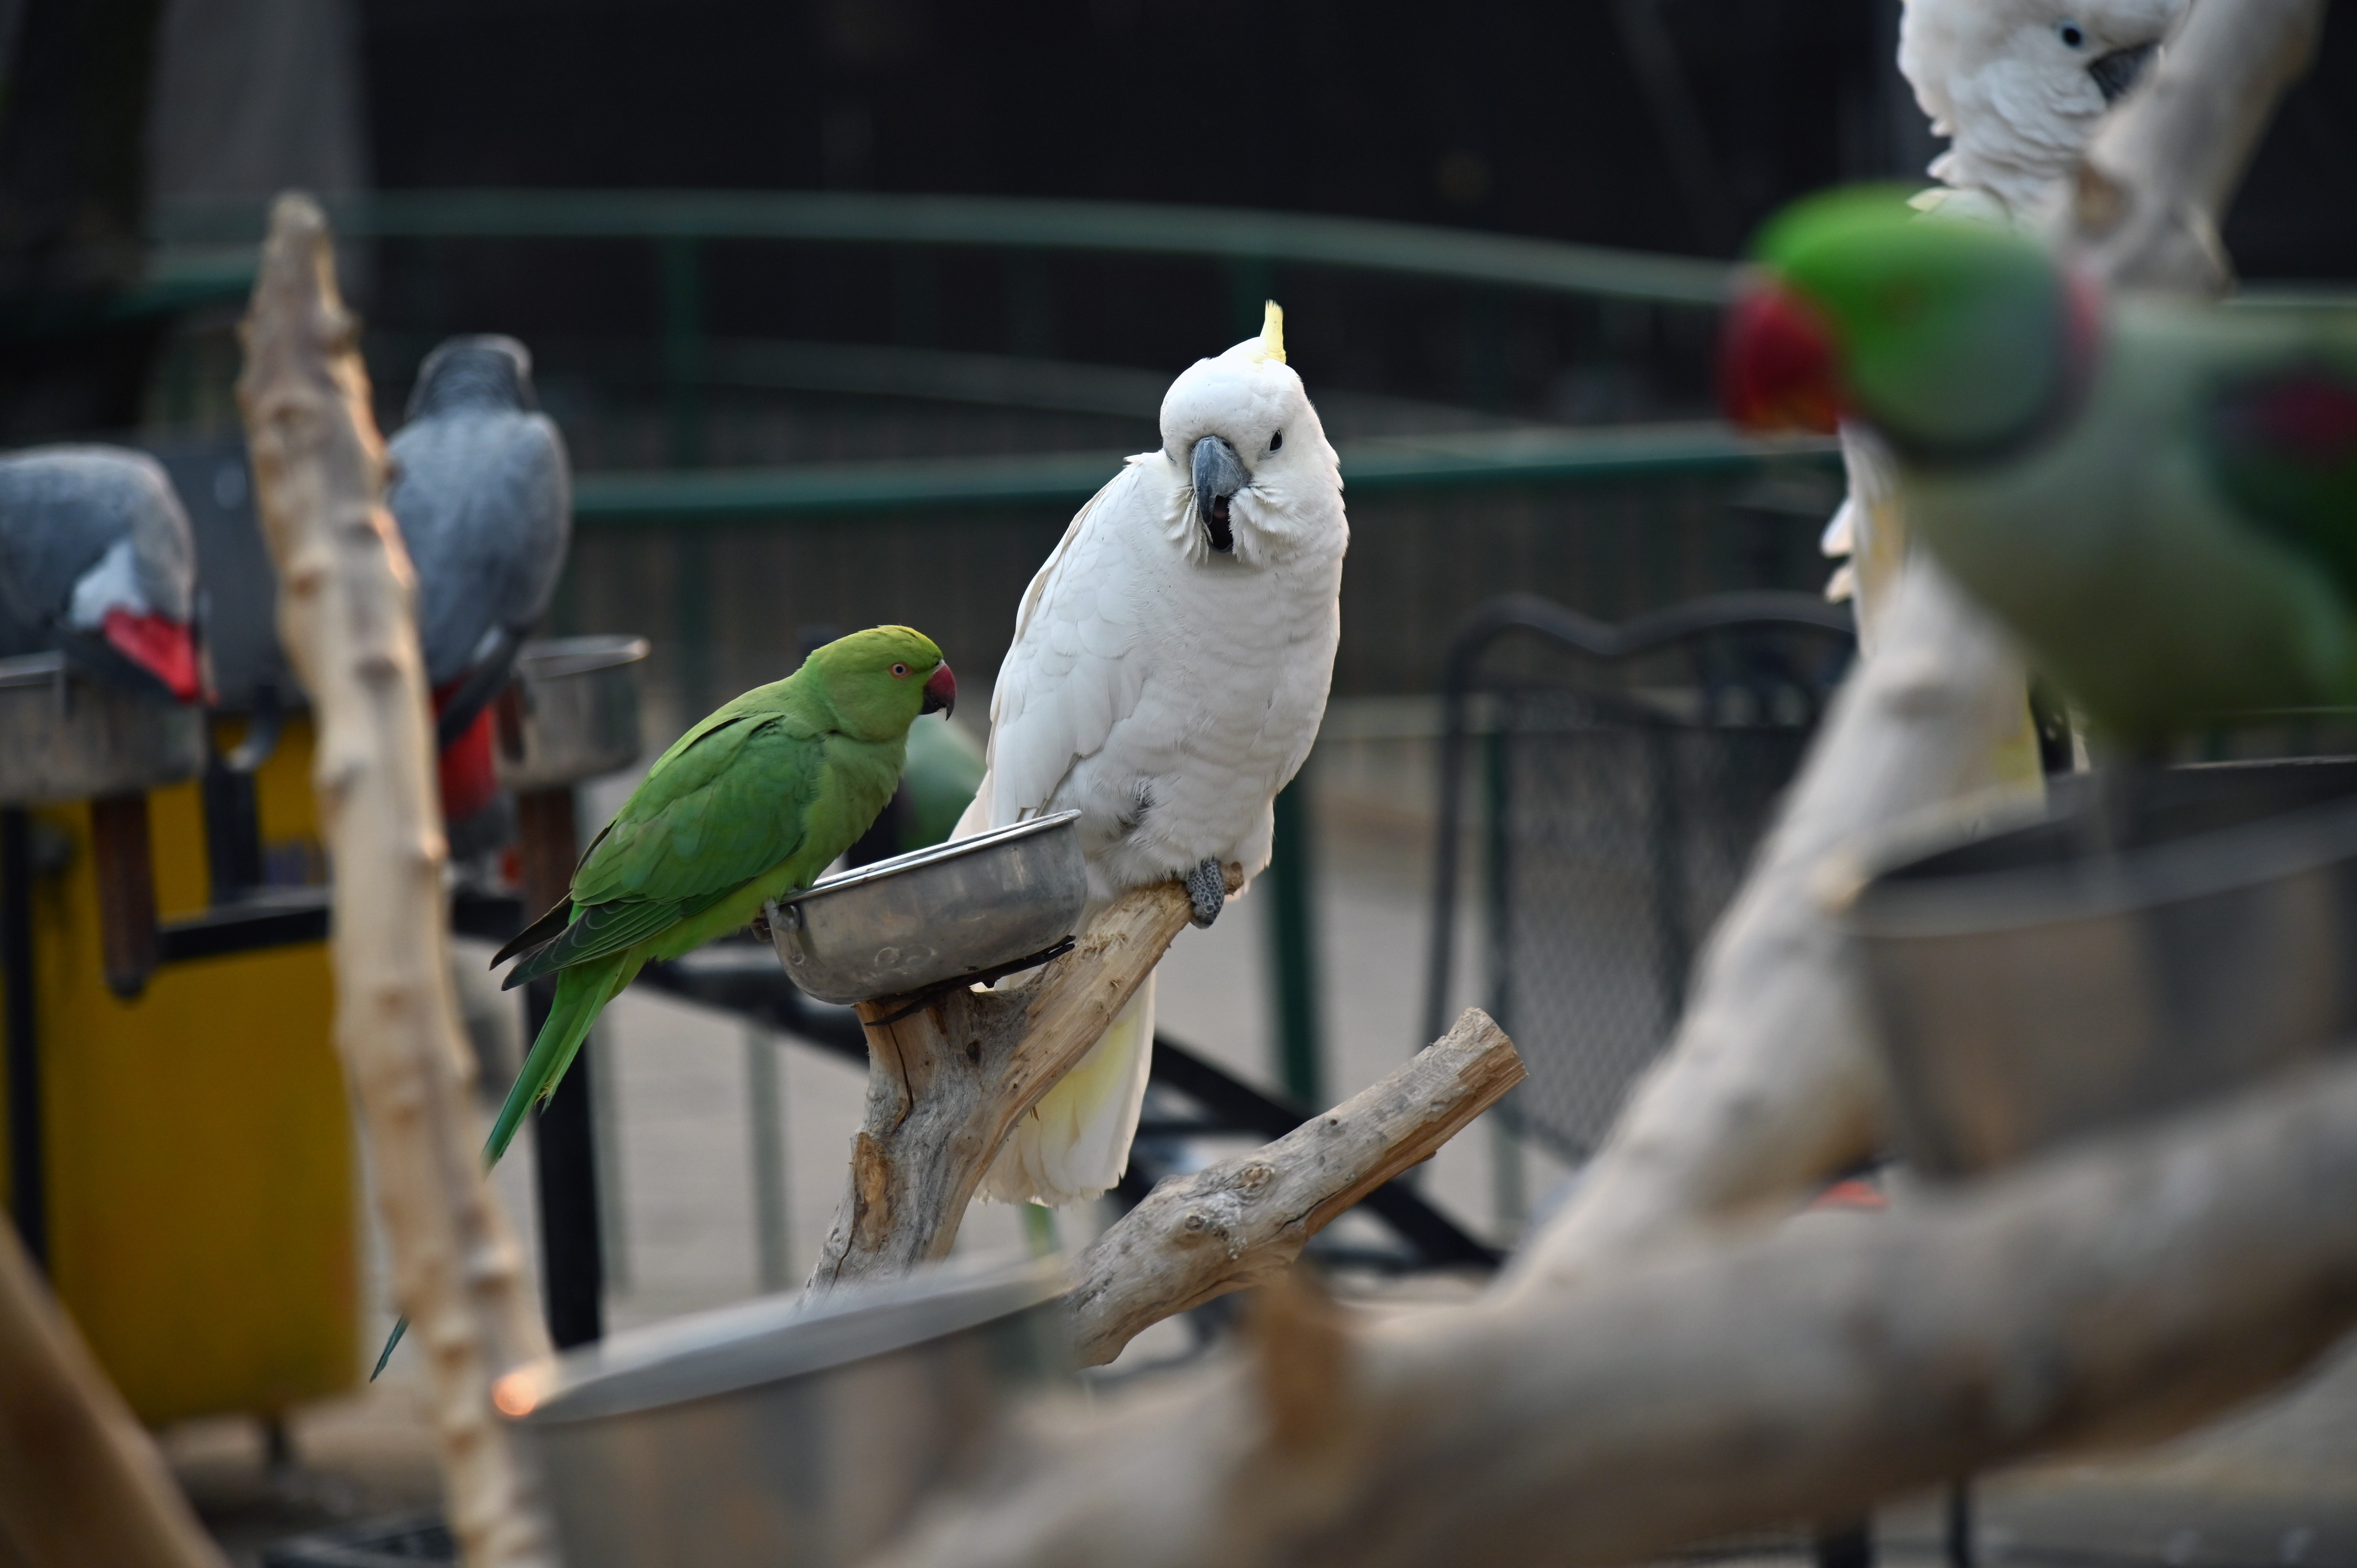 The White Cockatoo and parrot eating grains